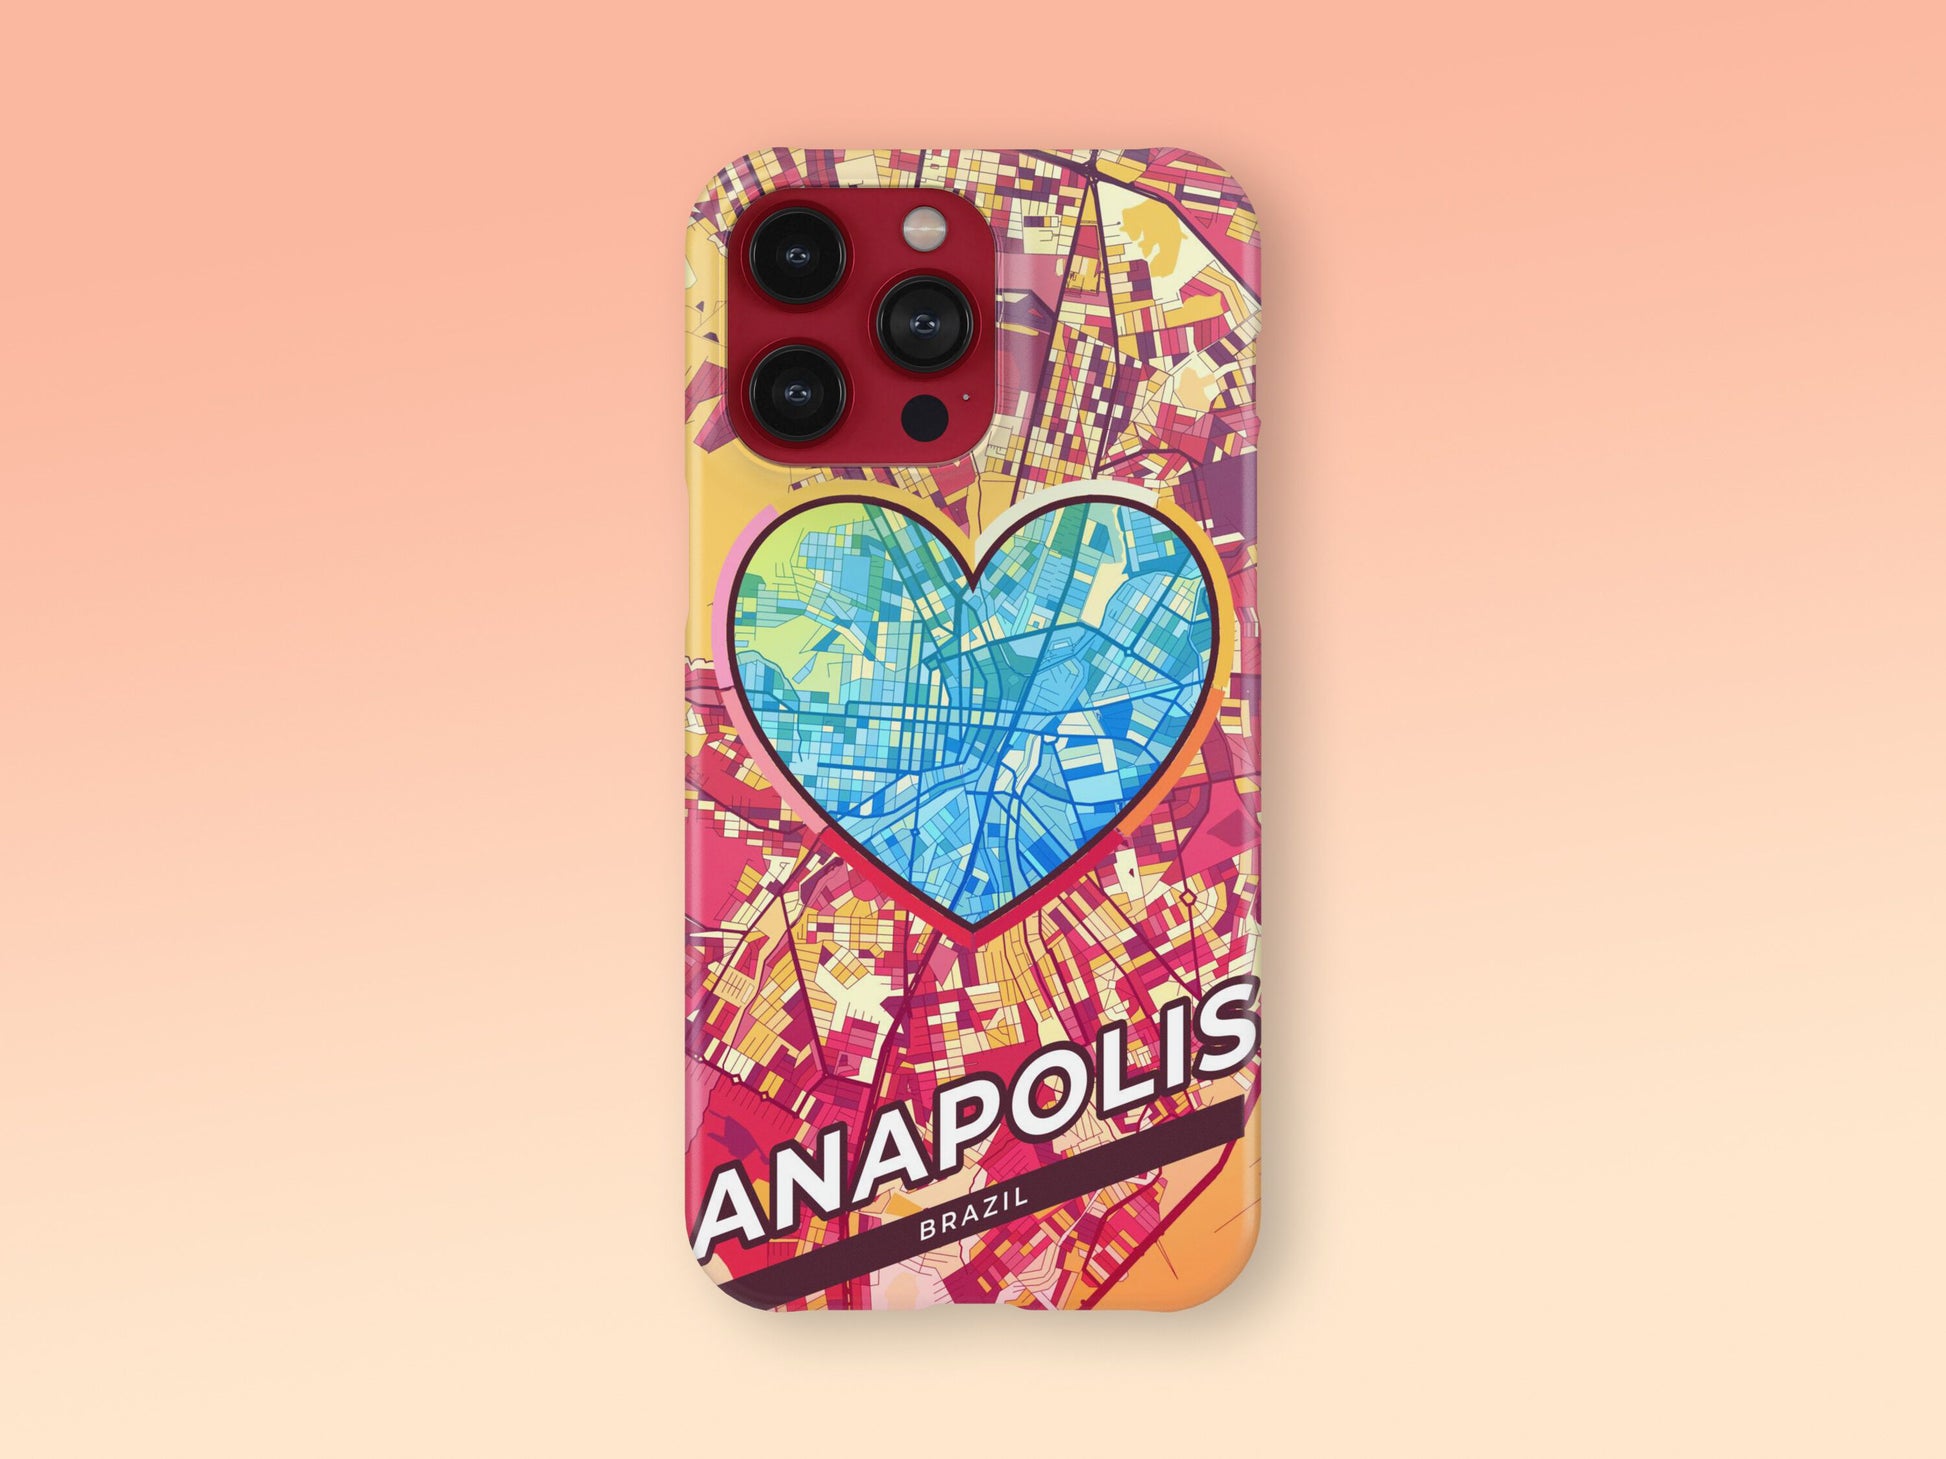 Anapolis Brazil slim phone case with colorful icon. Birthday, wedding or housewarming gift. Couple match cases. 2